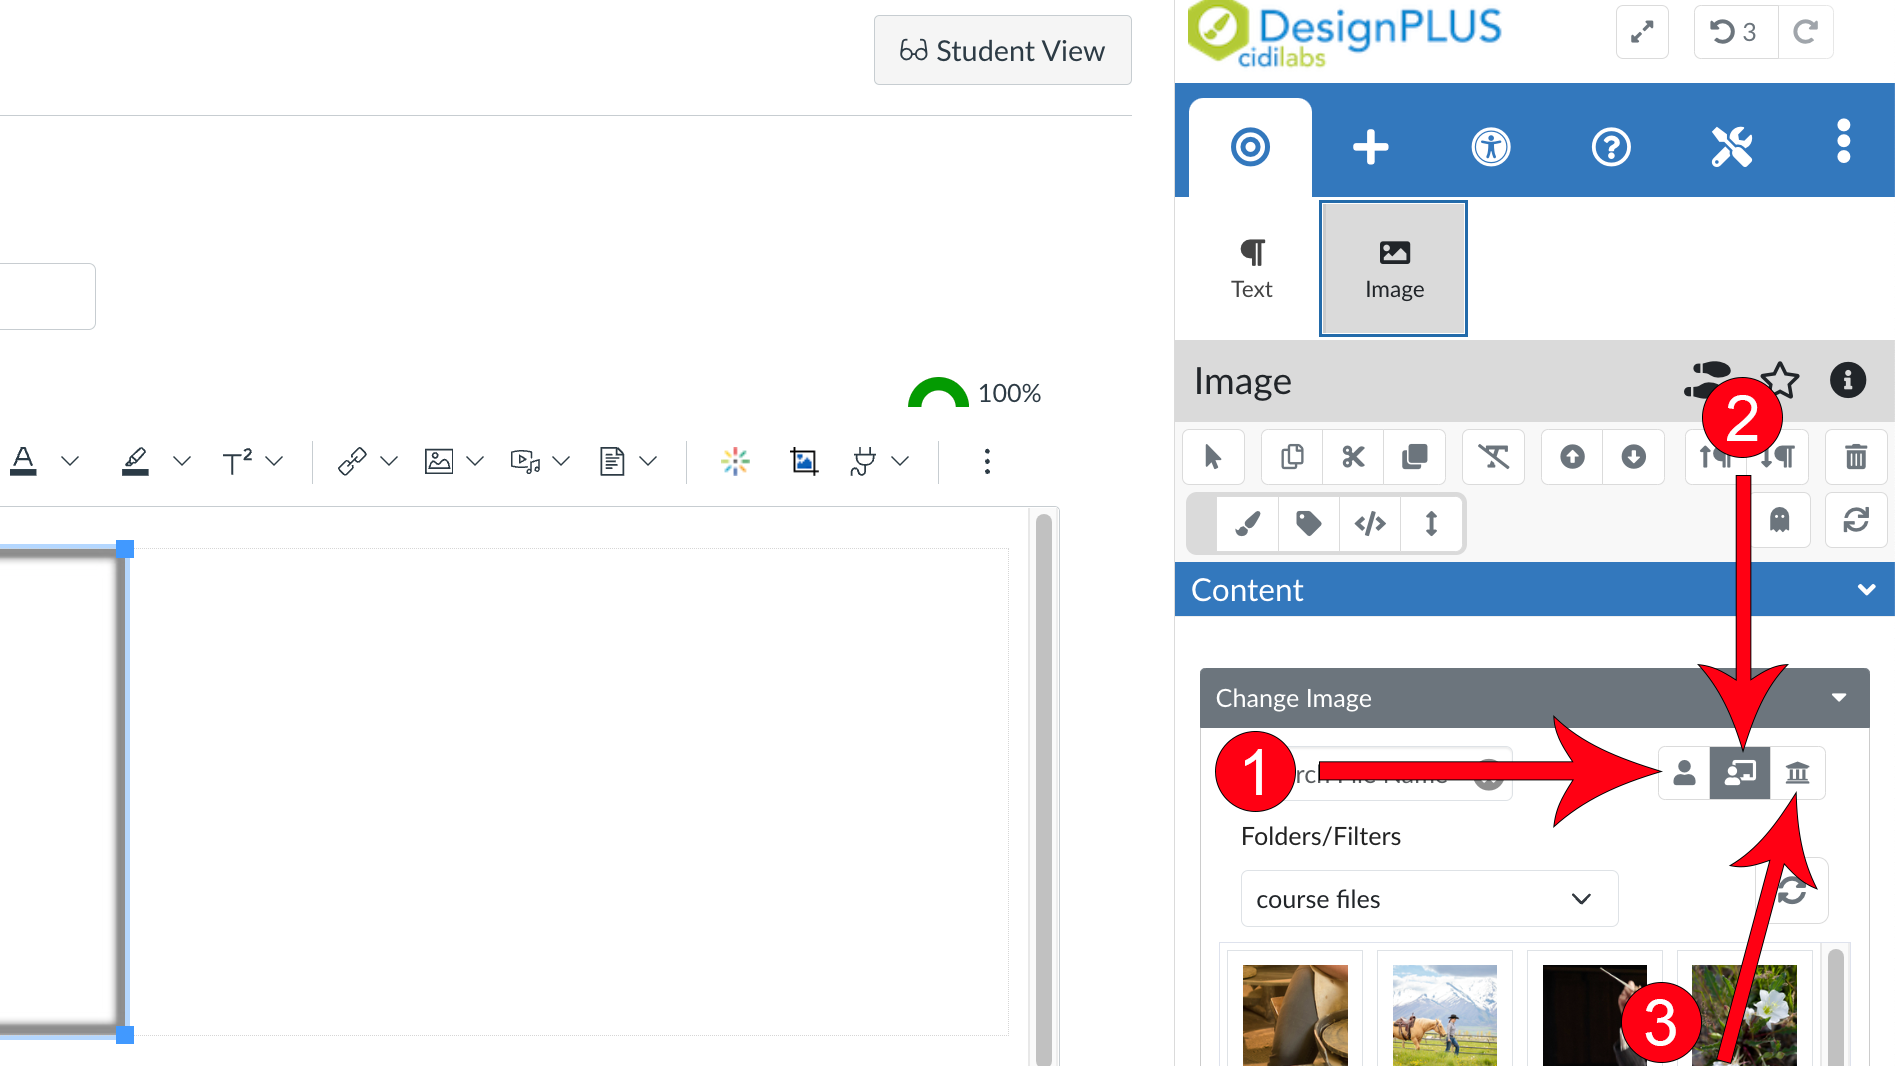 DesignPLUS sidebar expanded 3 arrows pointing at (1) single user icon (2) user with whiteboard icon (3) museum icon.